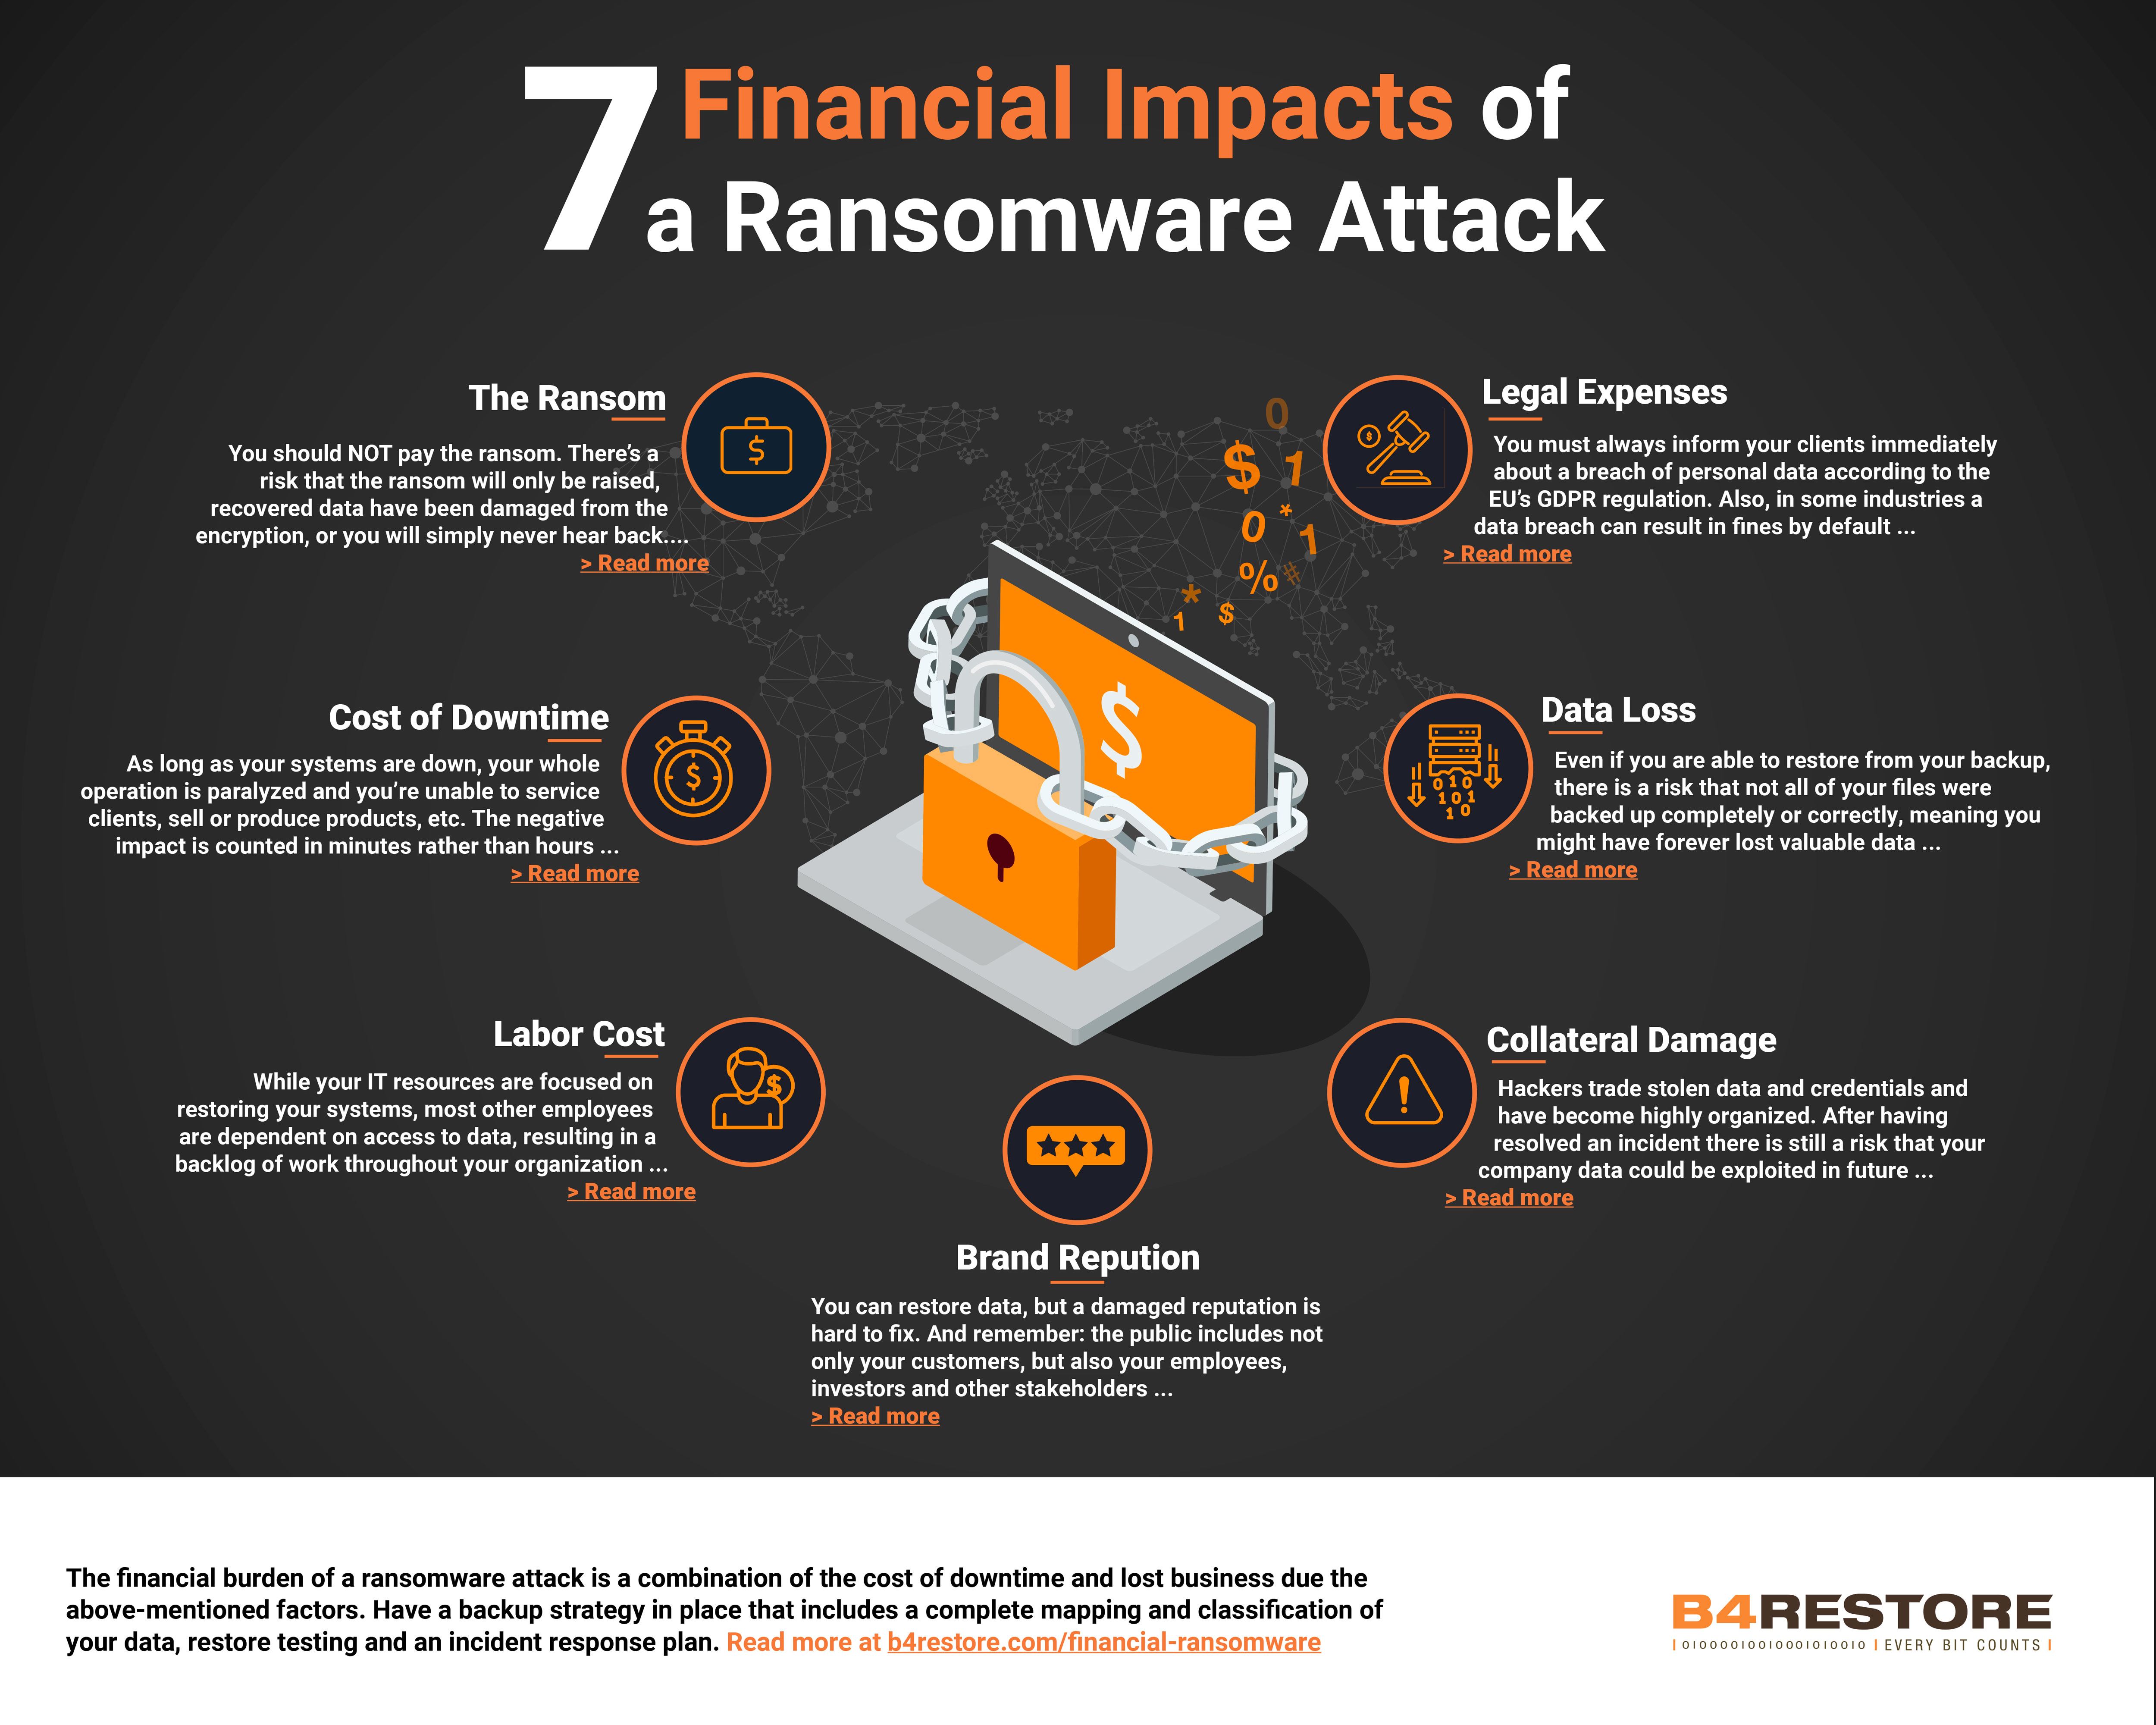 7 Financial Impacts of a Ransomware Attack